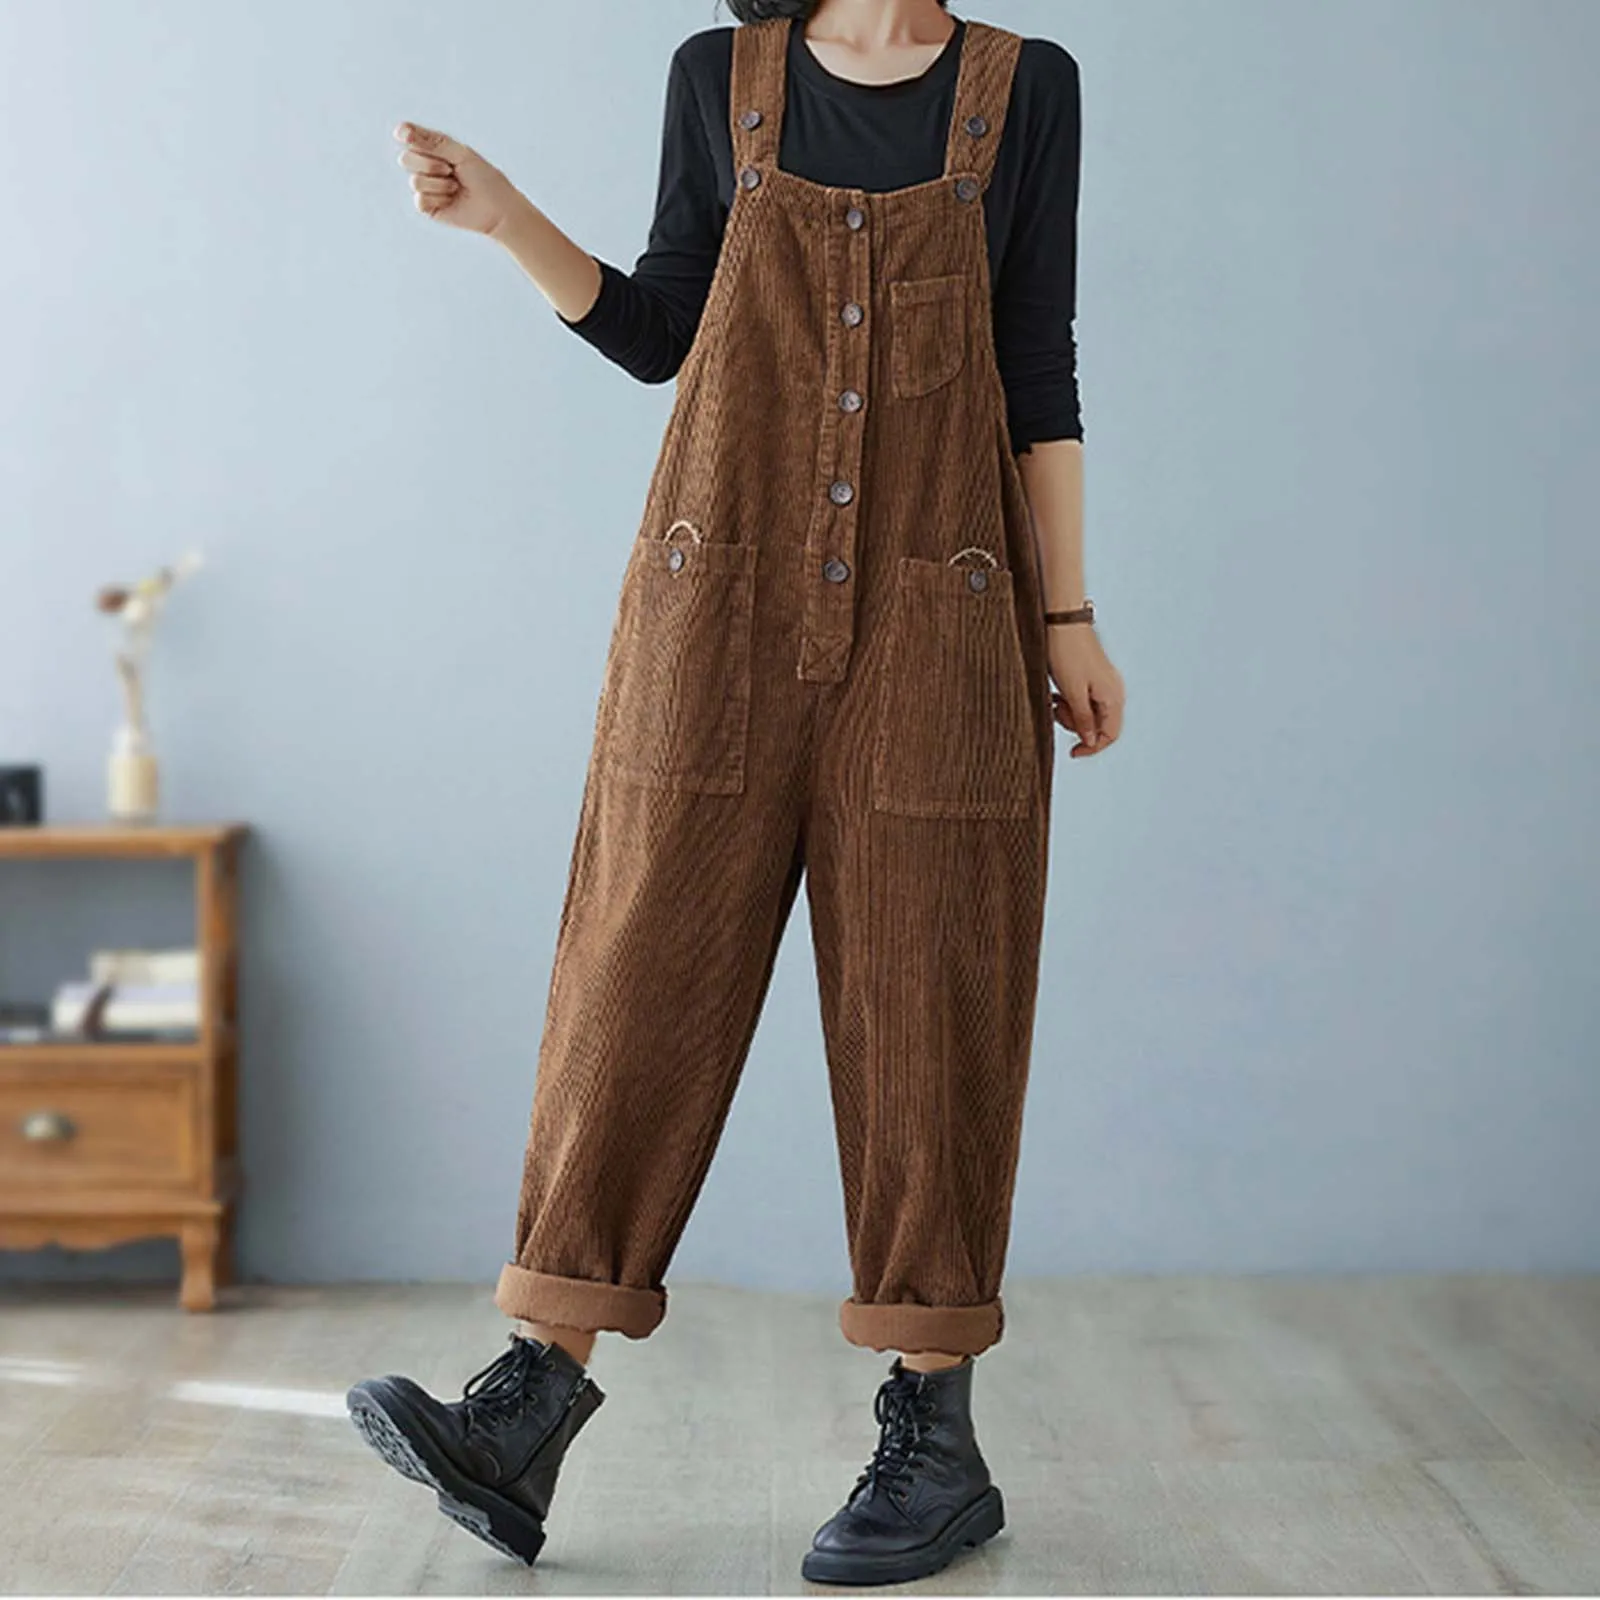 

Vintage Corduroy Jumpsuits Women's Spring Autumn Overalls Casual Suspender Wide Leg Playsuits Female Solid Rompers Trousers